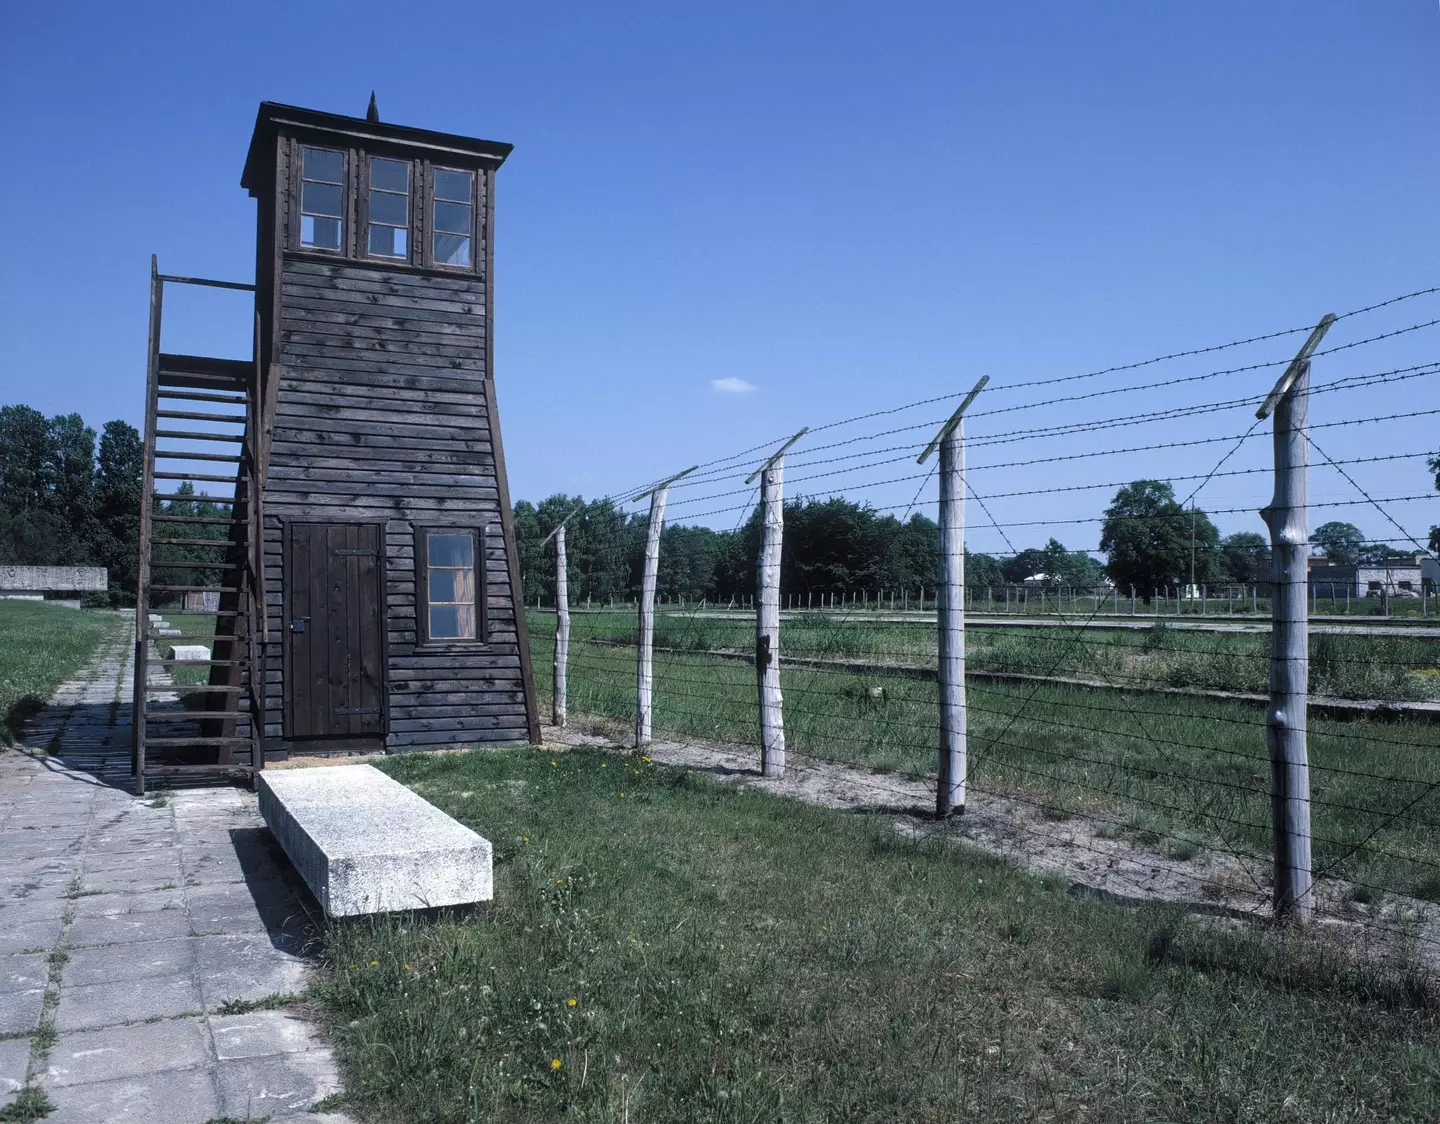 Sutthof concentration camp operated in a then-Nazi-occupied Poland.